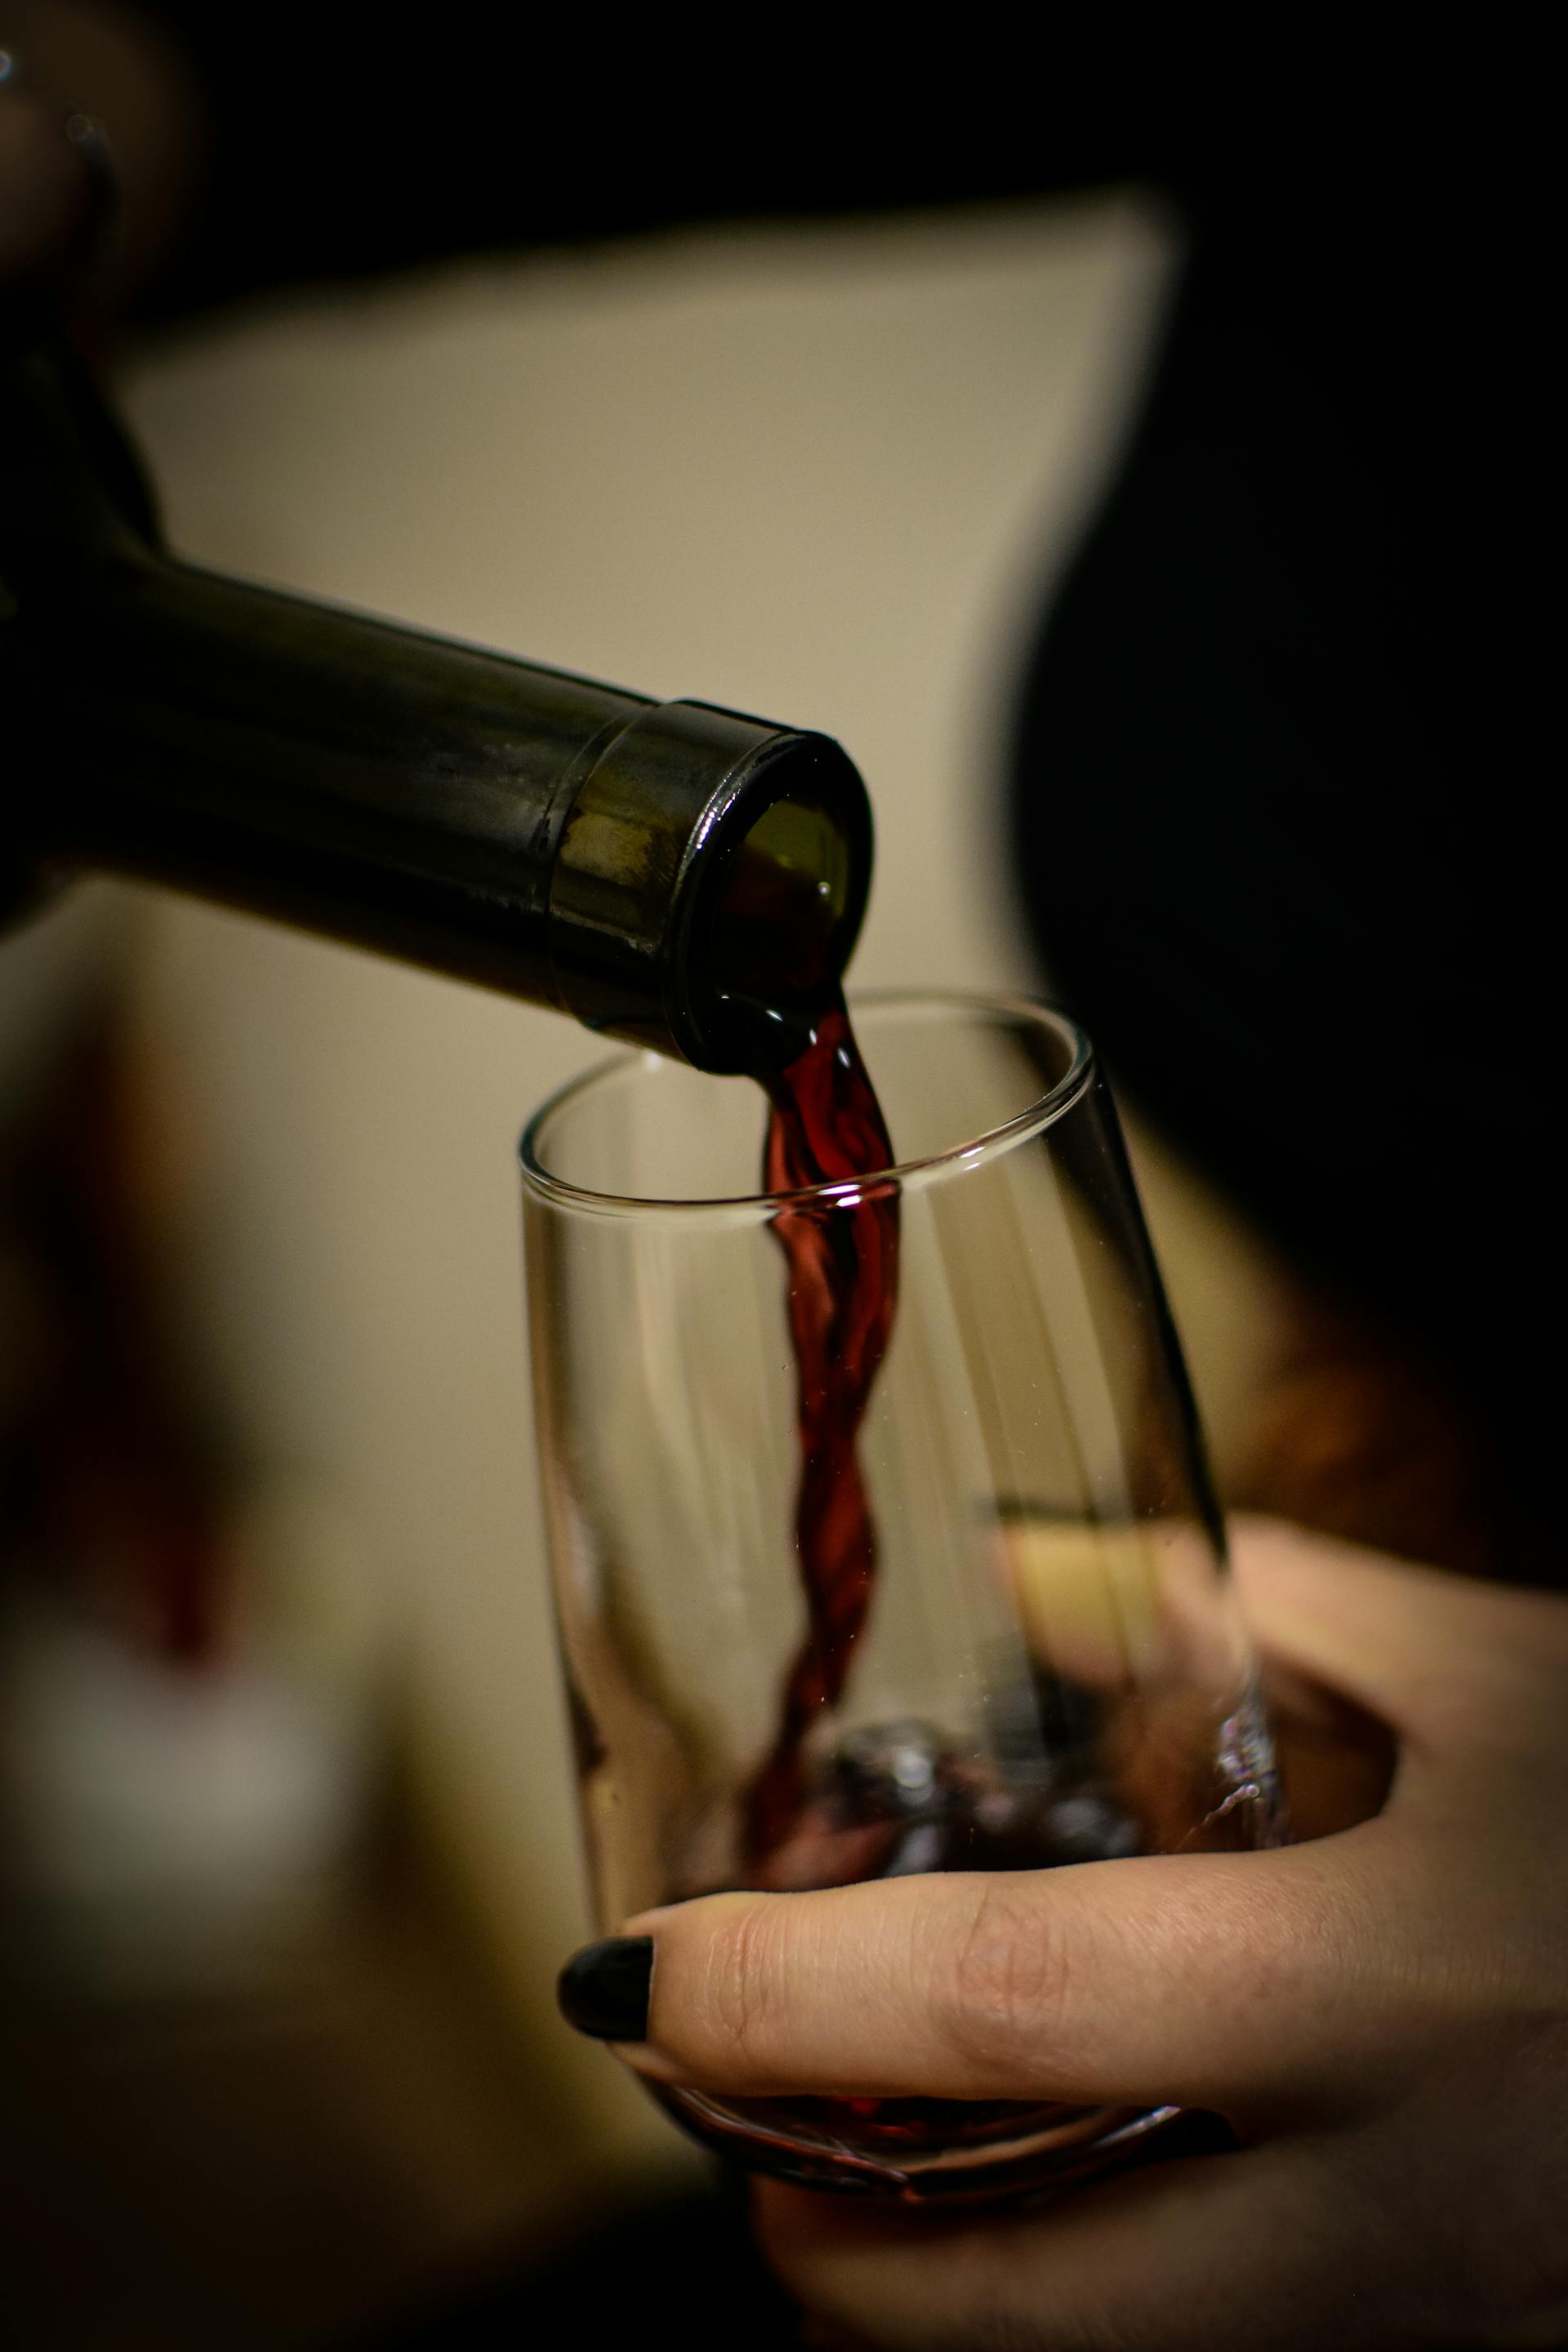 A woman pouring wine | Source: Pexels